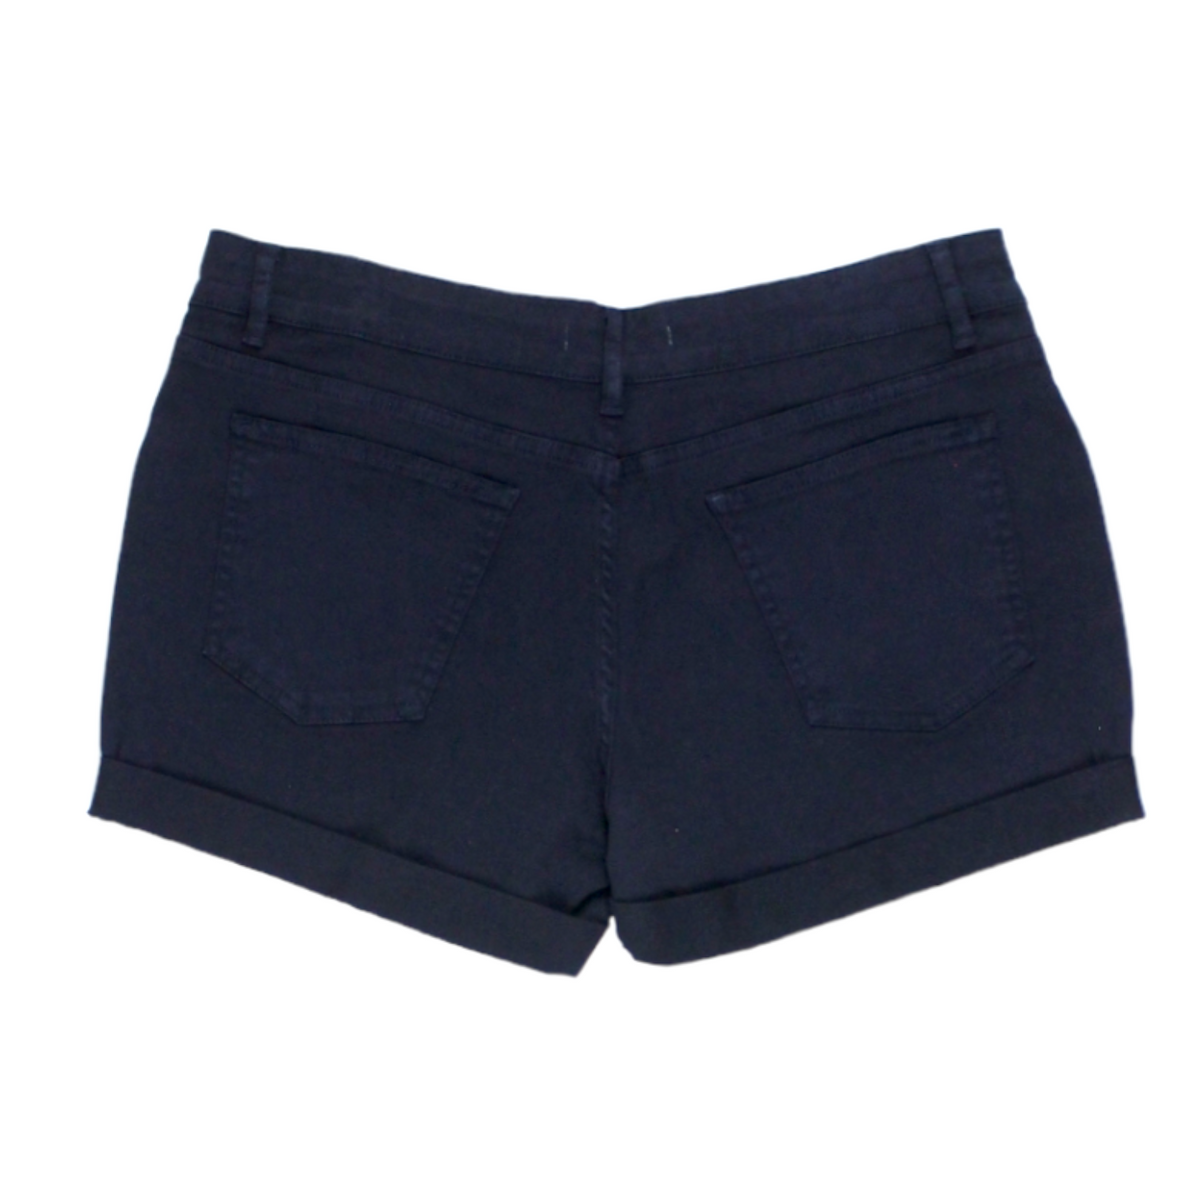 NRBY Navy Cotton Twill Shorts - Sample